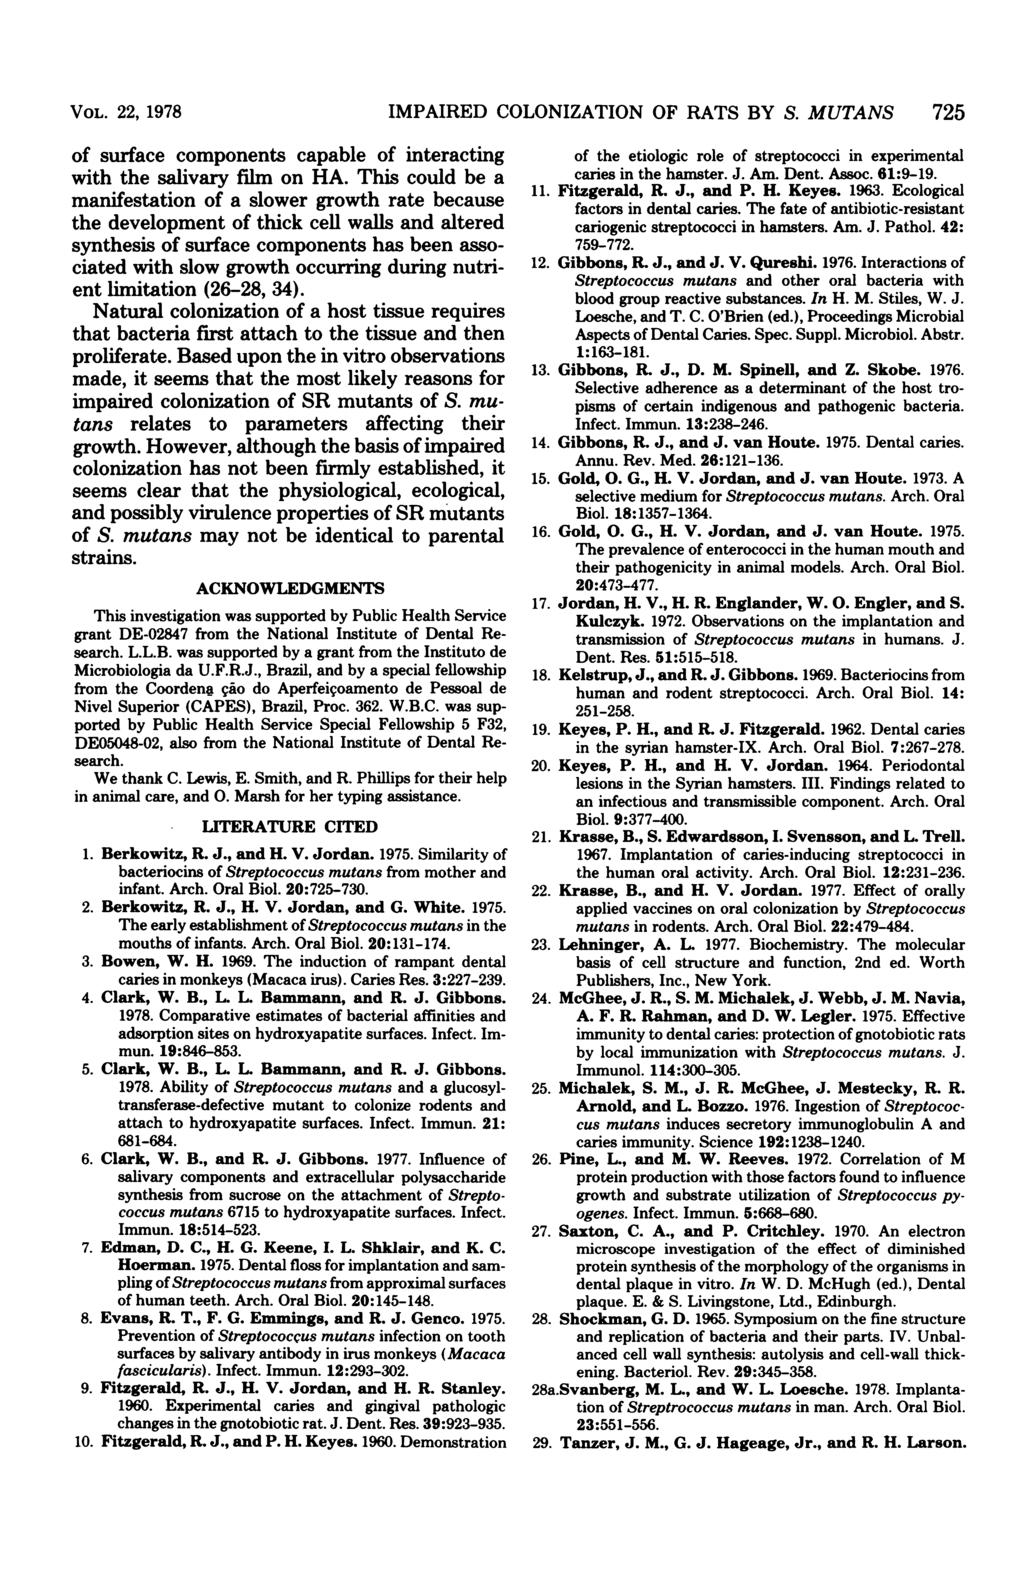 VOL. 22, 1978 of surface components capable of interacting with the salivary film on HA.